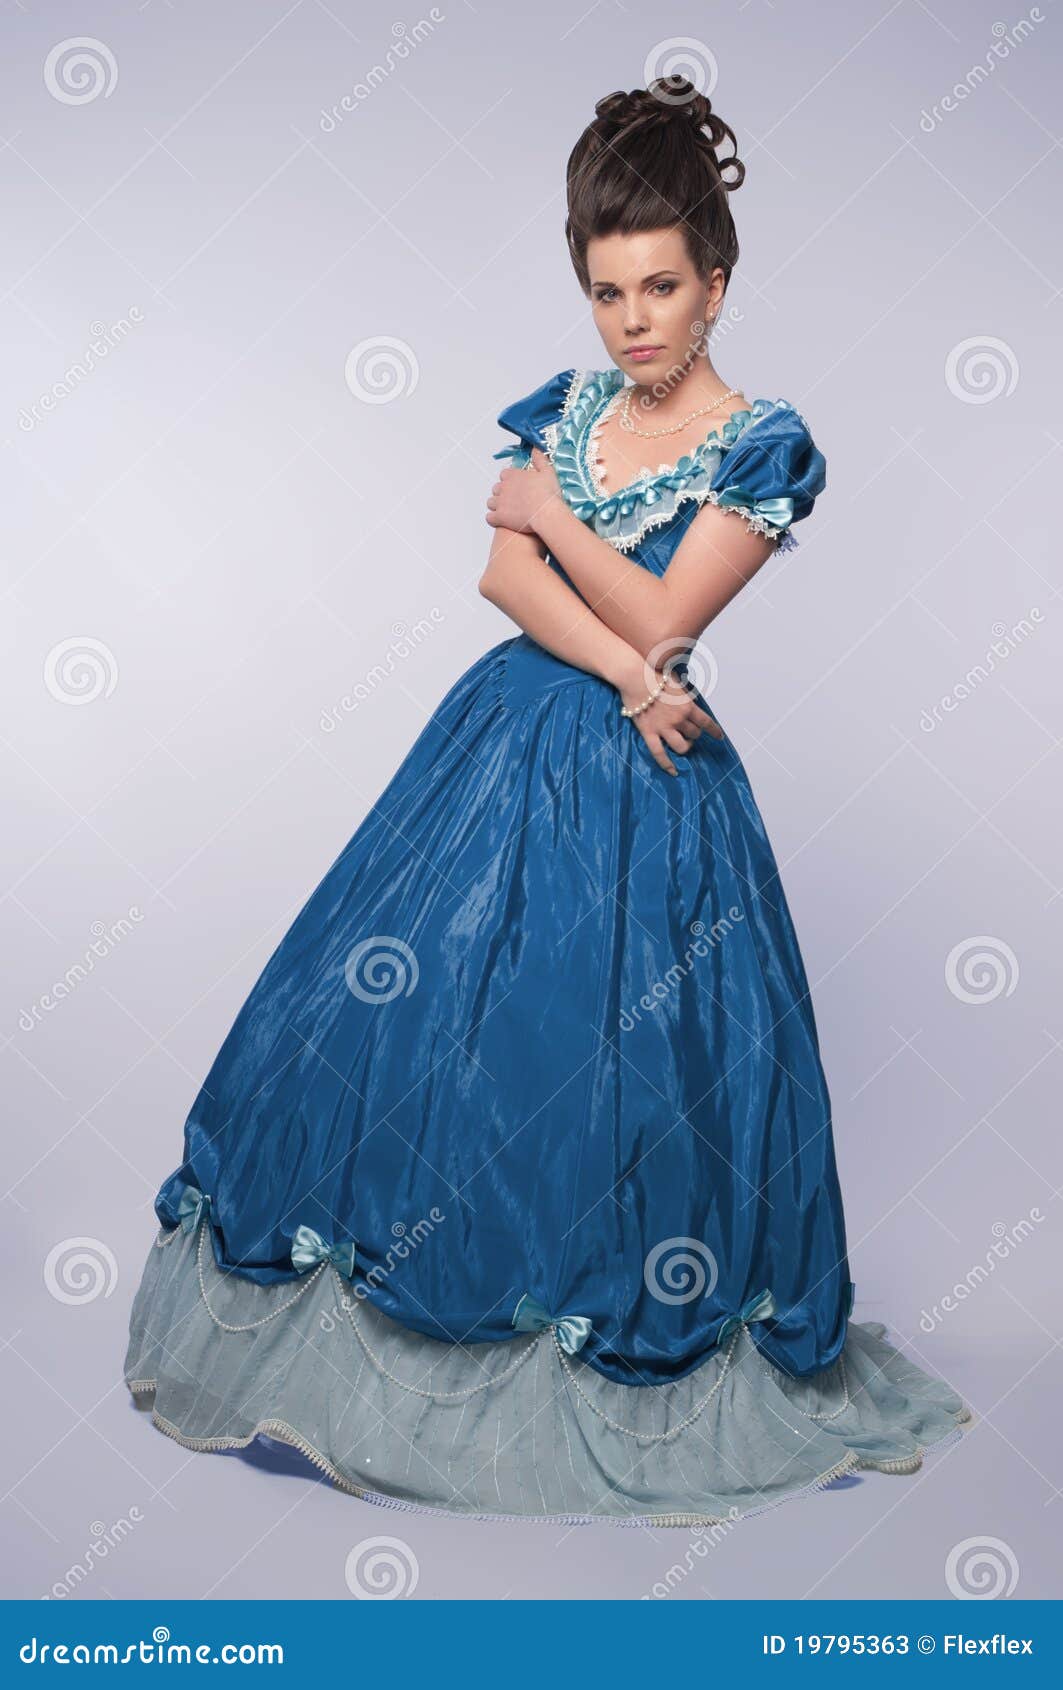 Old Fashioned Girl In Blue Dress Stock Photos - Image: 19795363